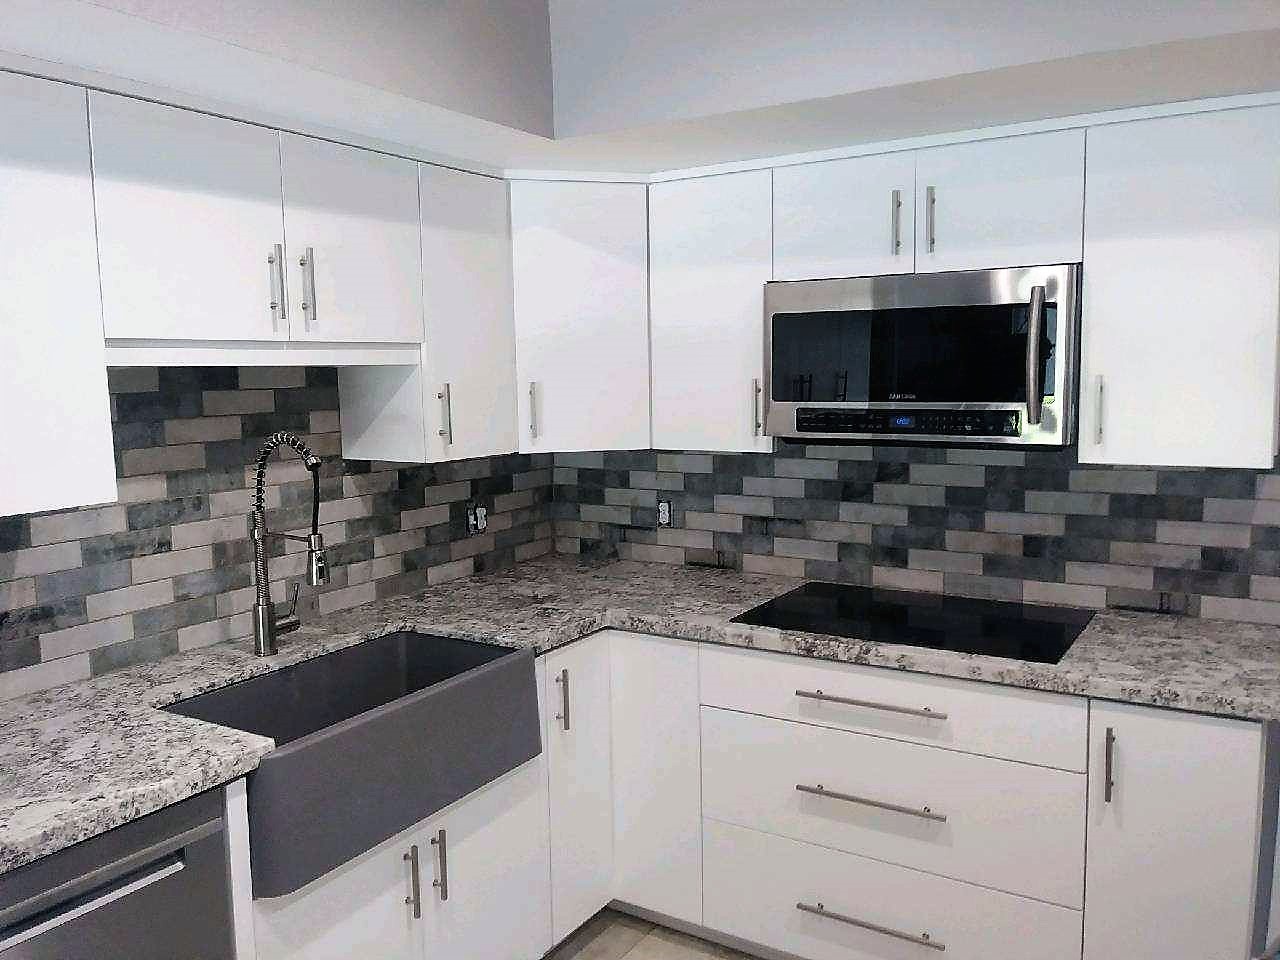 A kitchen with white cabinets and black tile